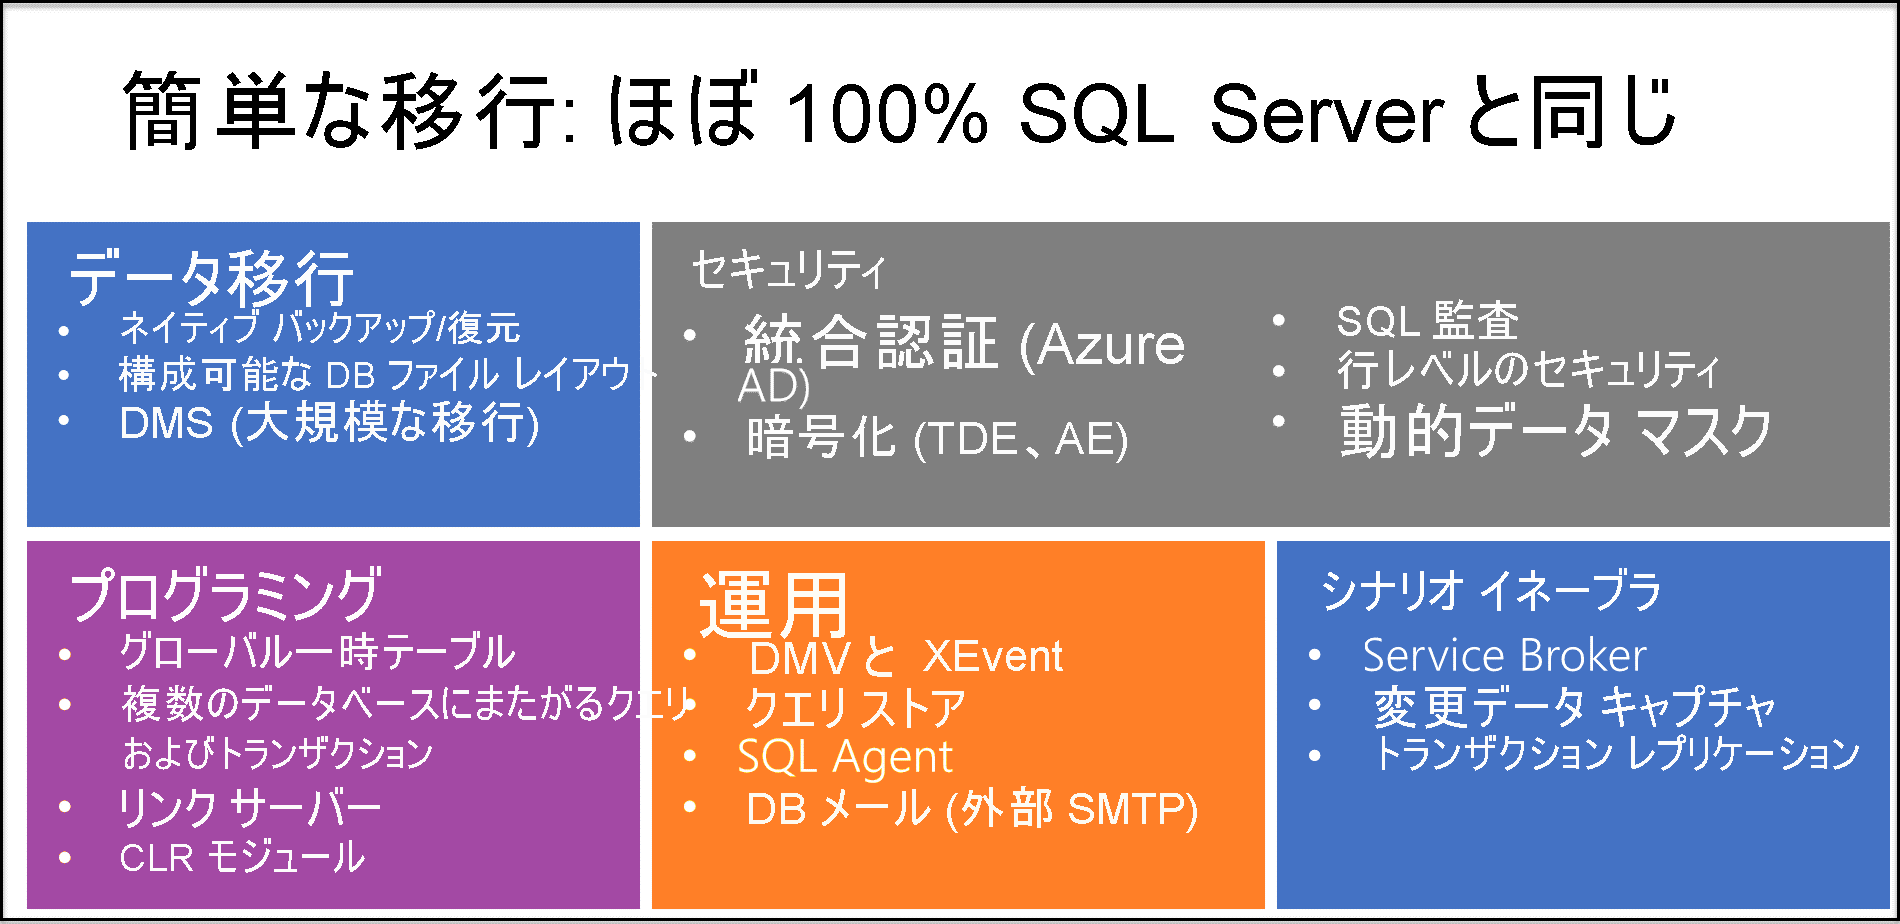 Diagram explaining some of the most important features of Azure SQL Managed Instance.